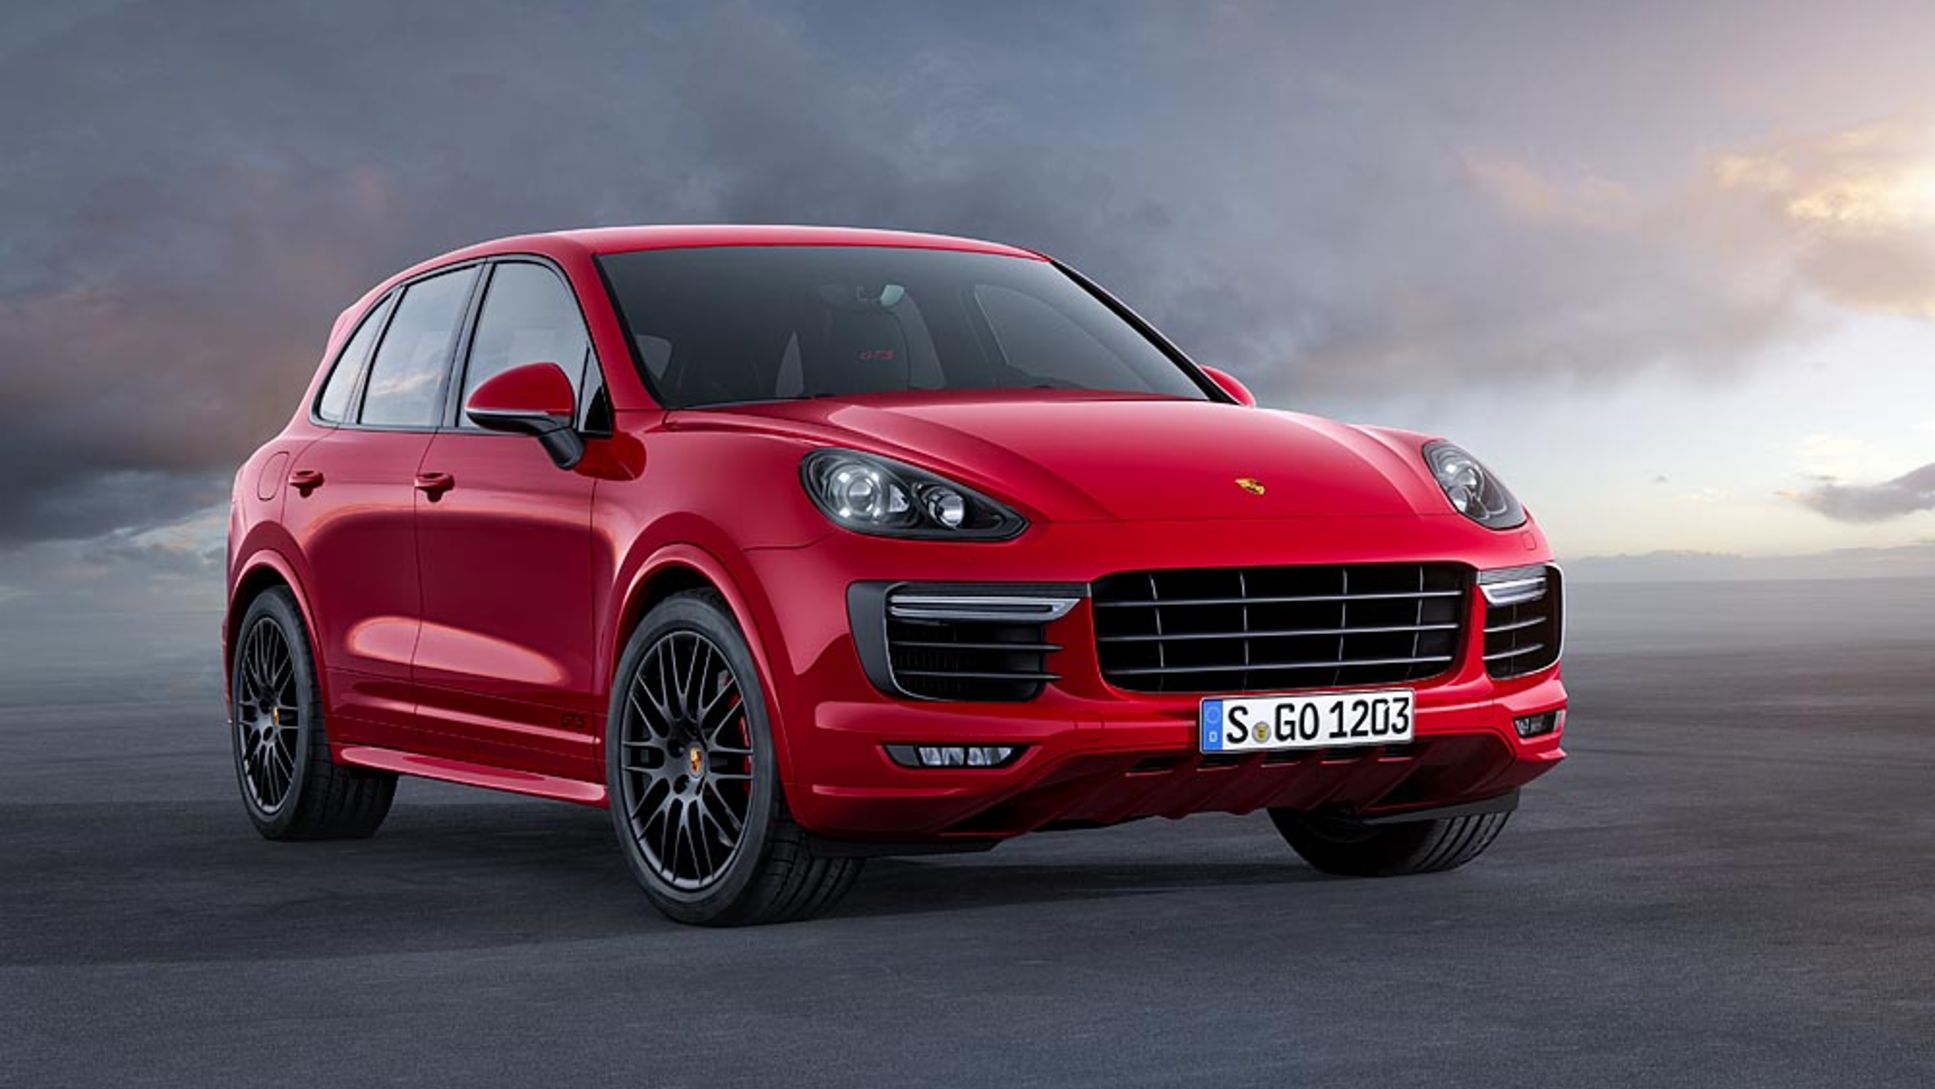 New Cayenne GTS Models by Porsche Launched  Pricing Starts at Rs 2 crore